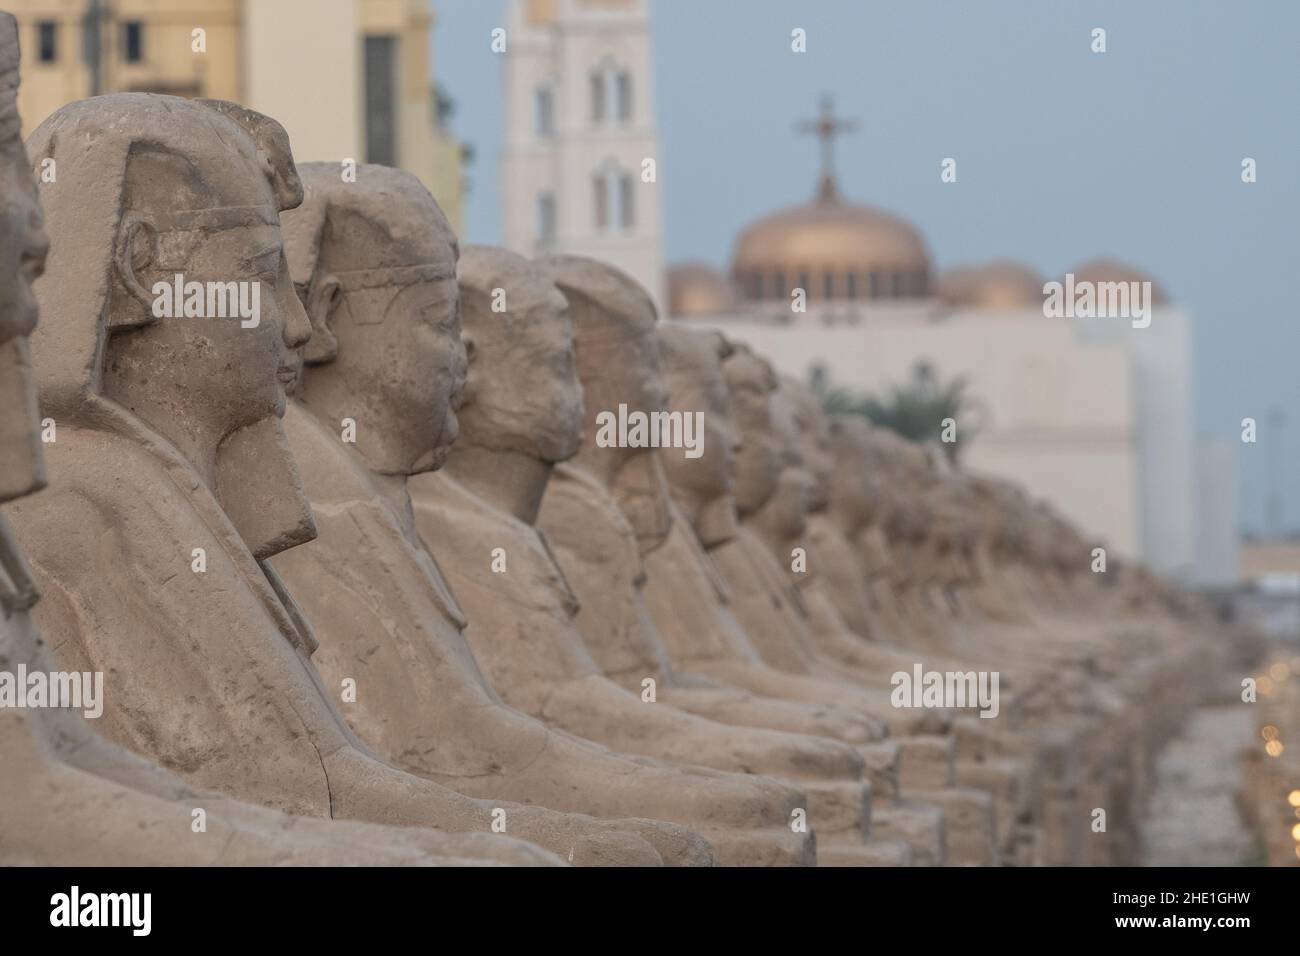 The ancient sphinx statues lining the avenue of sphinxes in Luxor, Egypt the historic road is lined with 100s of stone monuments. Stock Photo